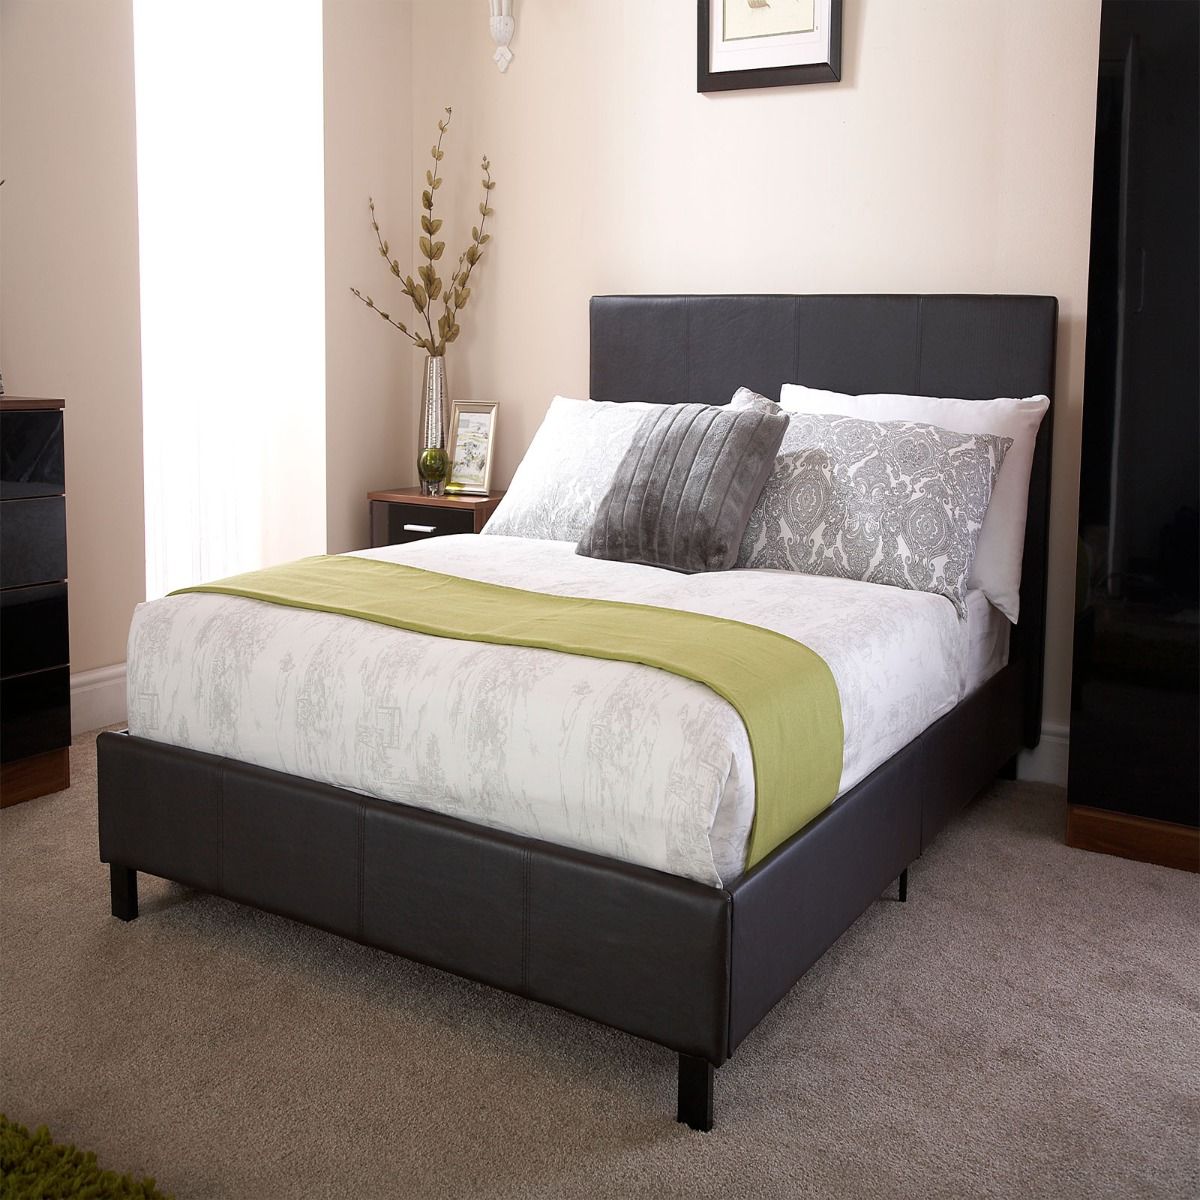 Faux Leather Bed in a Box - Black